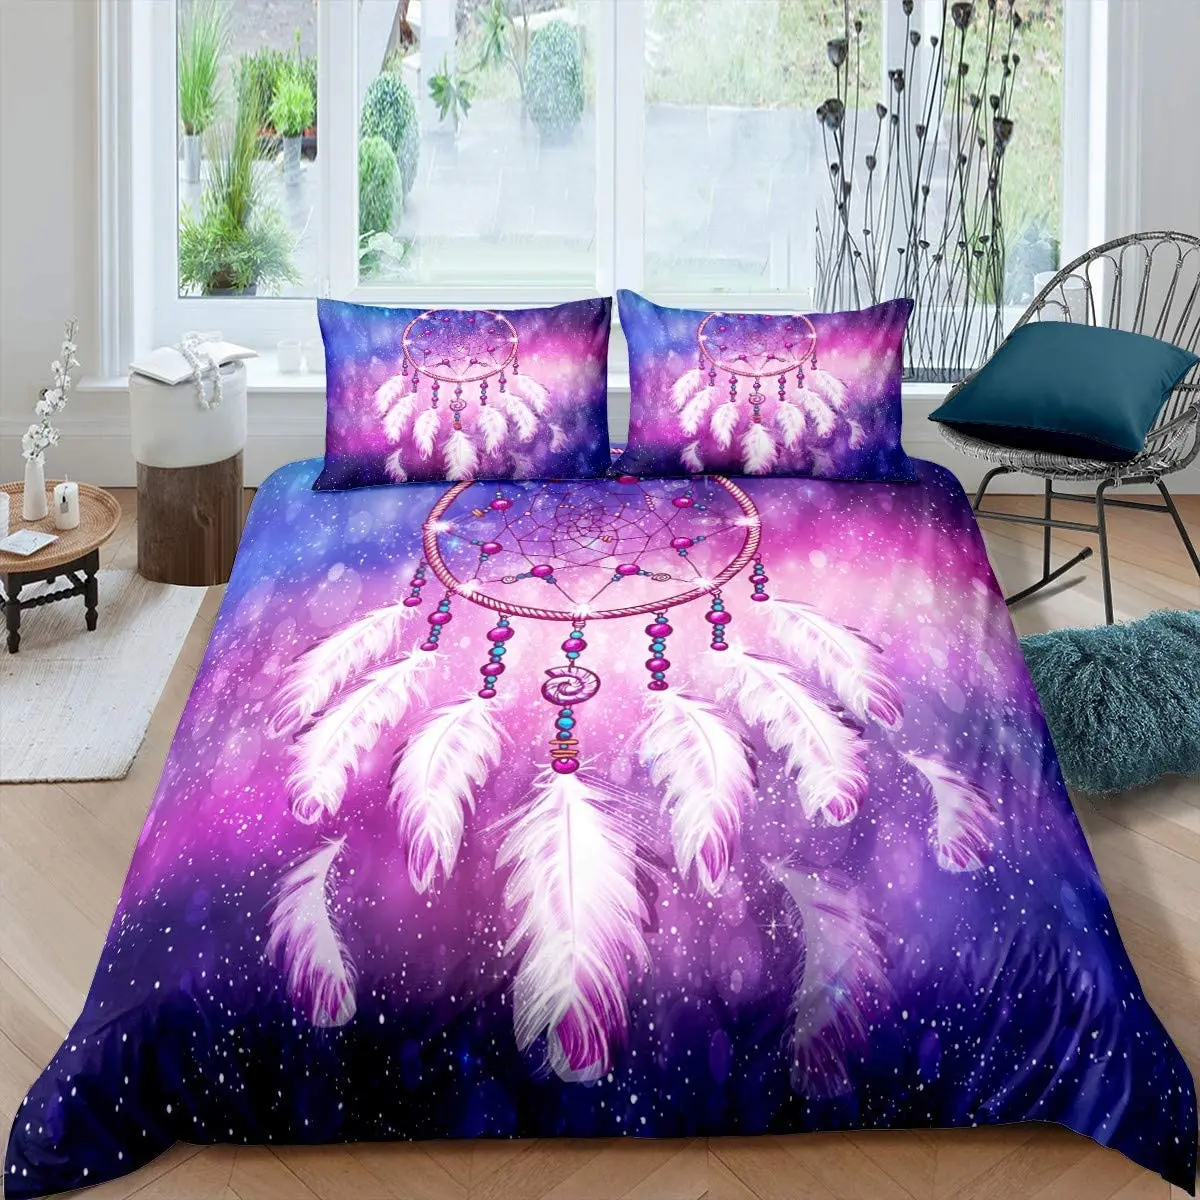 

Dream Catcher Duvet Cover Dream Catcher Galaxy Bedding Set Boho Feather Comforter Cover Indian Tribal Soft Polyester Quilt Cover